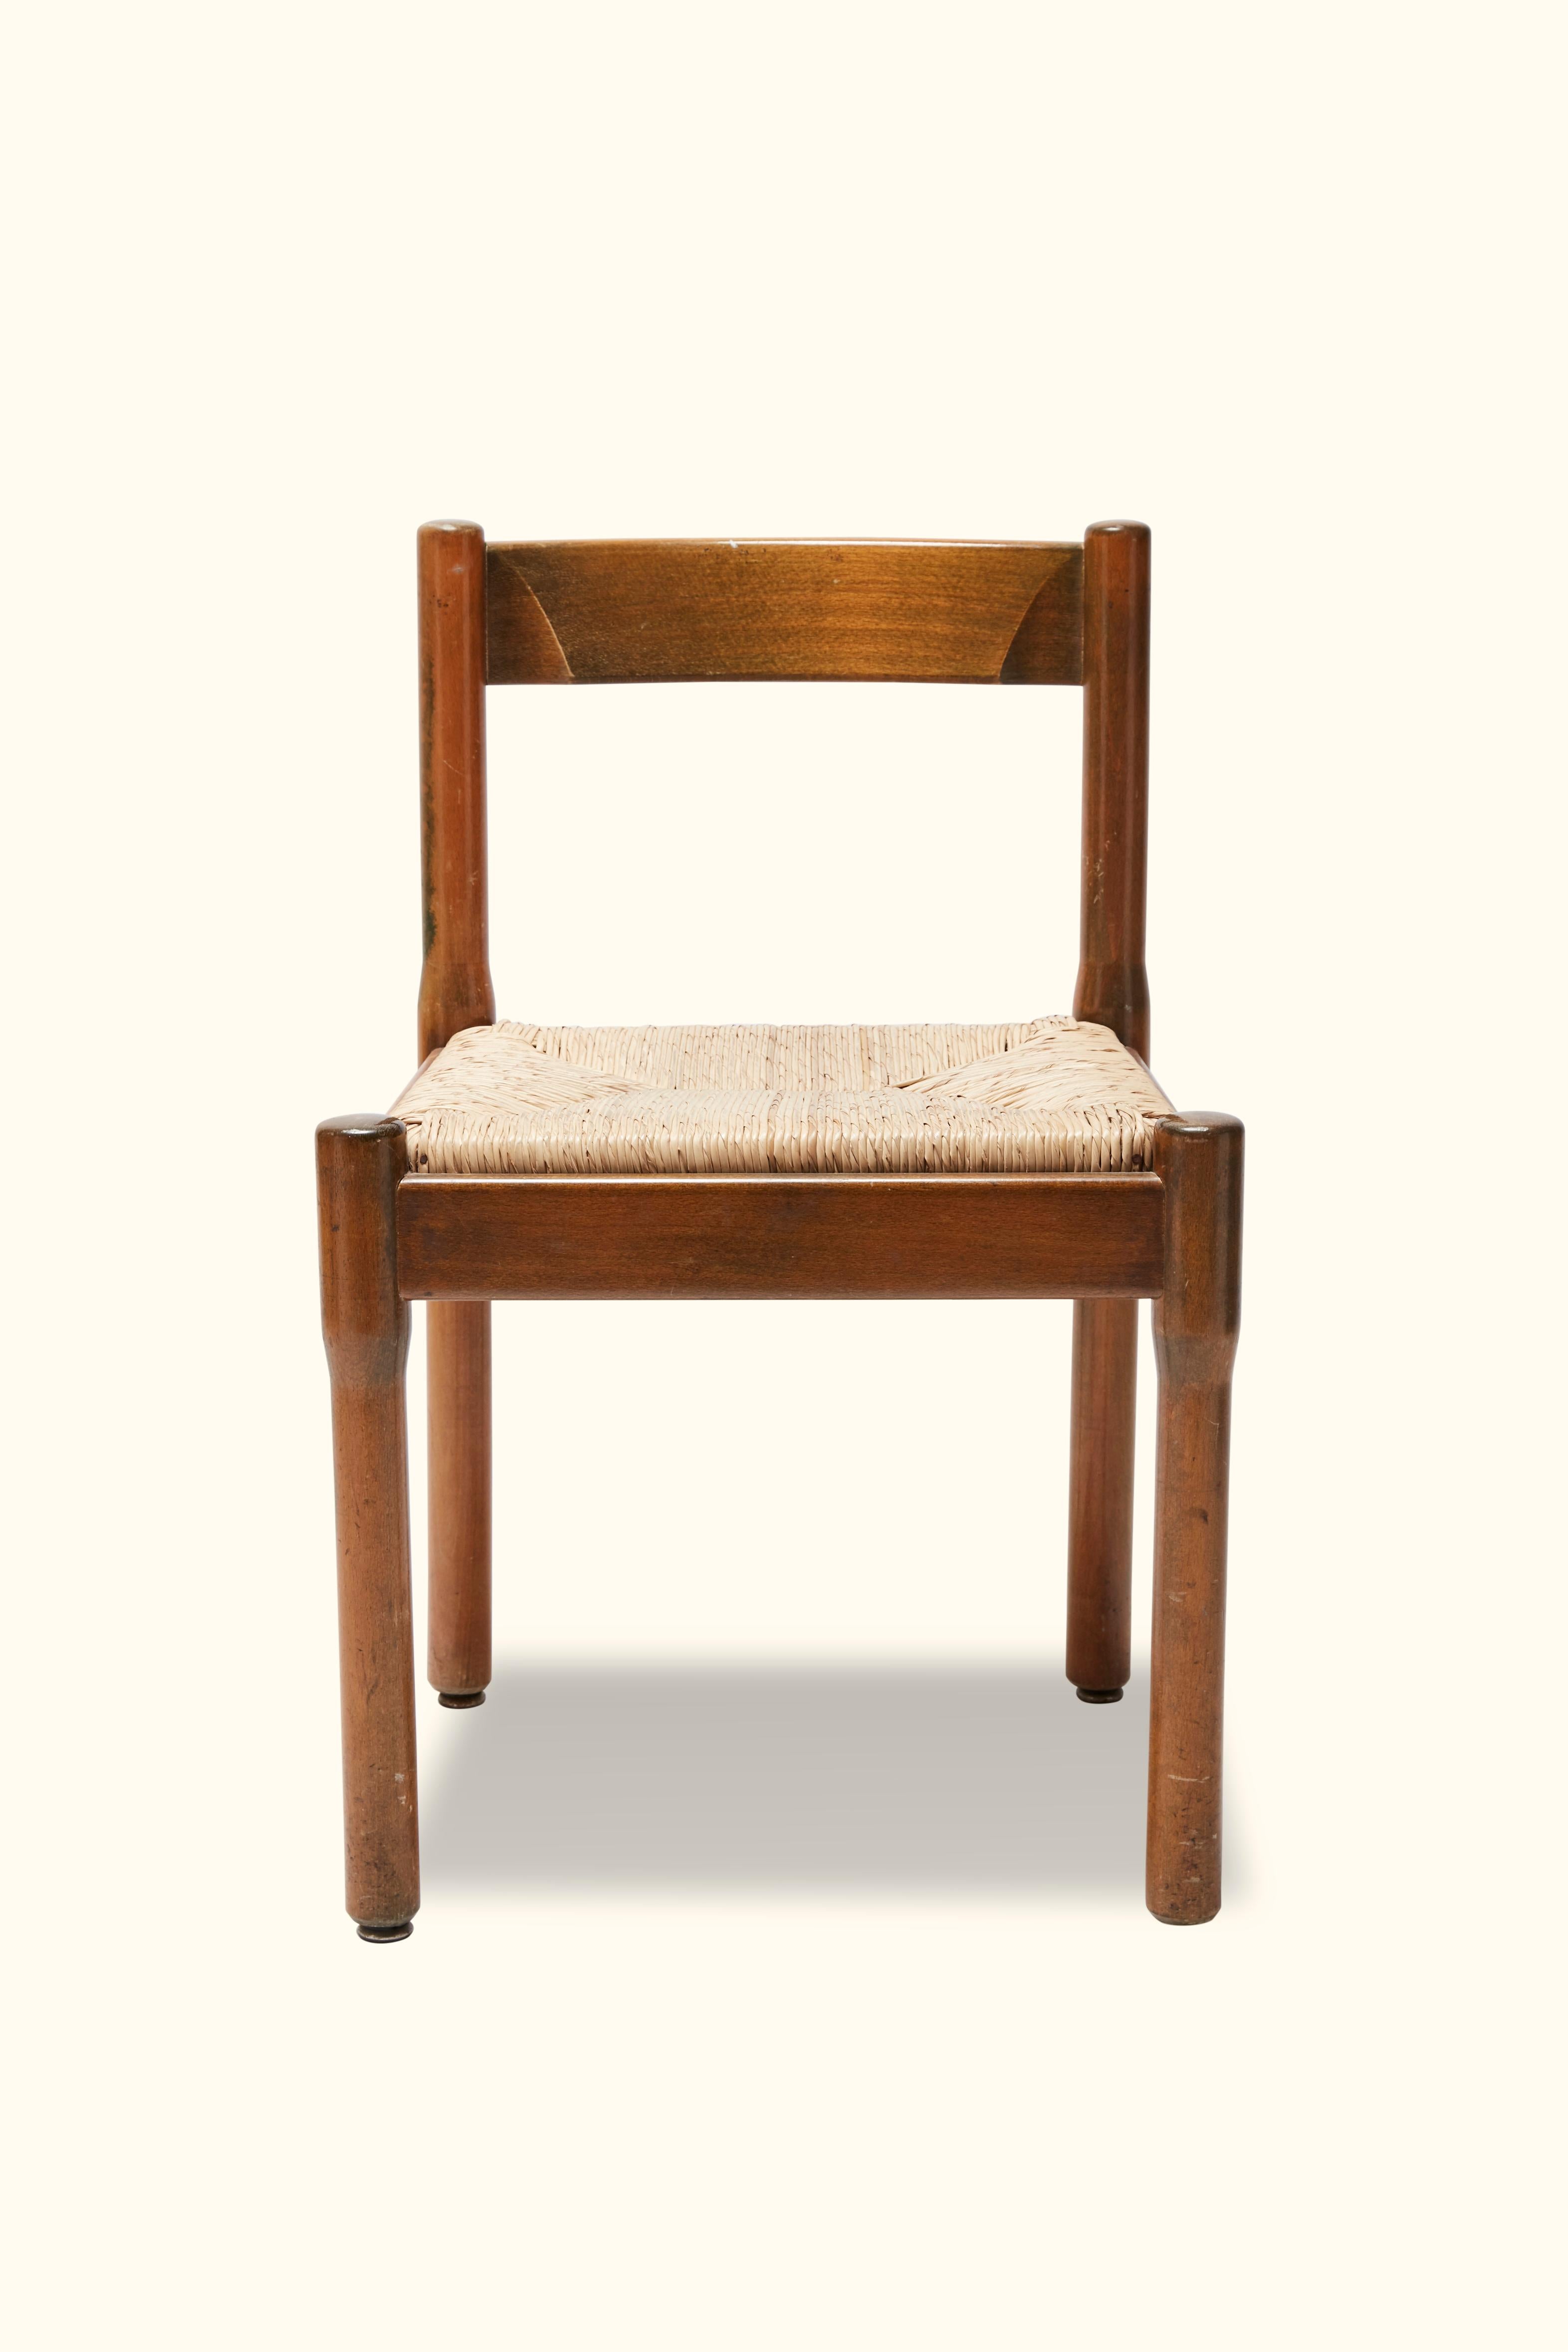 Set of 6 fruitwood dining chairs by Vico Magistretti.